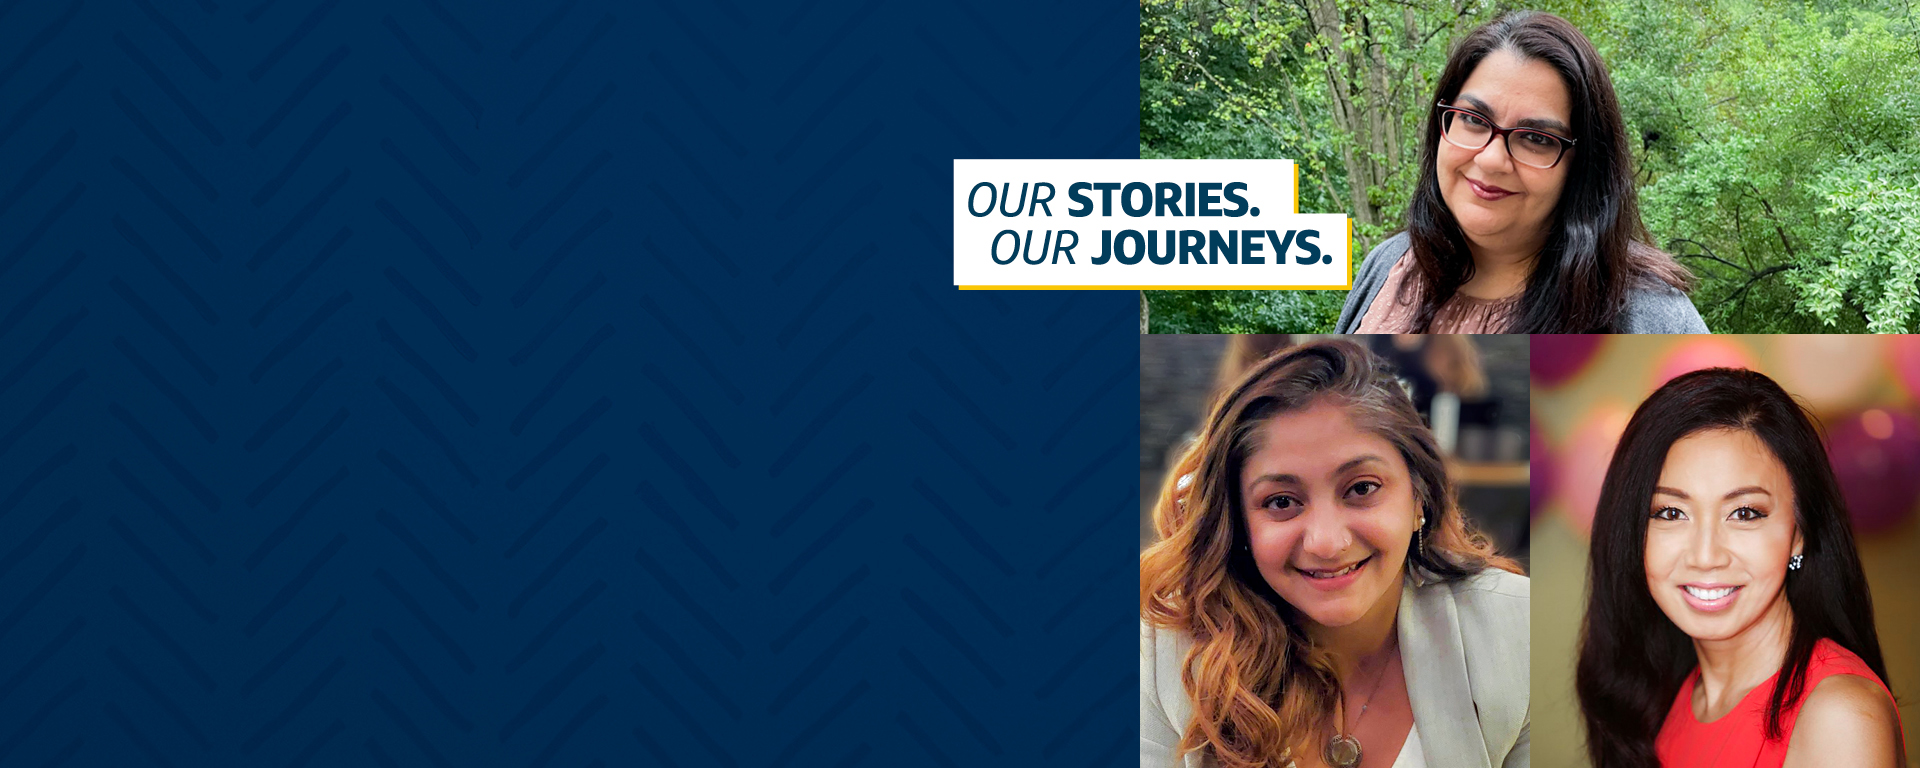 A collage of 3 images of Capital One associates, with the words 'Our Stories, Our Journeys,' next to a dark blue background